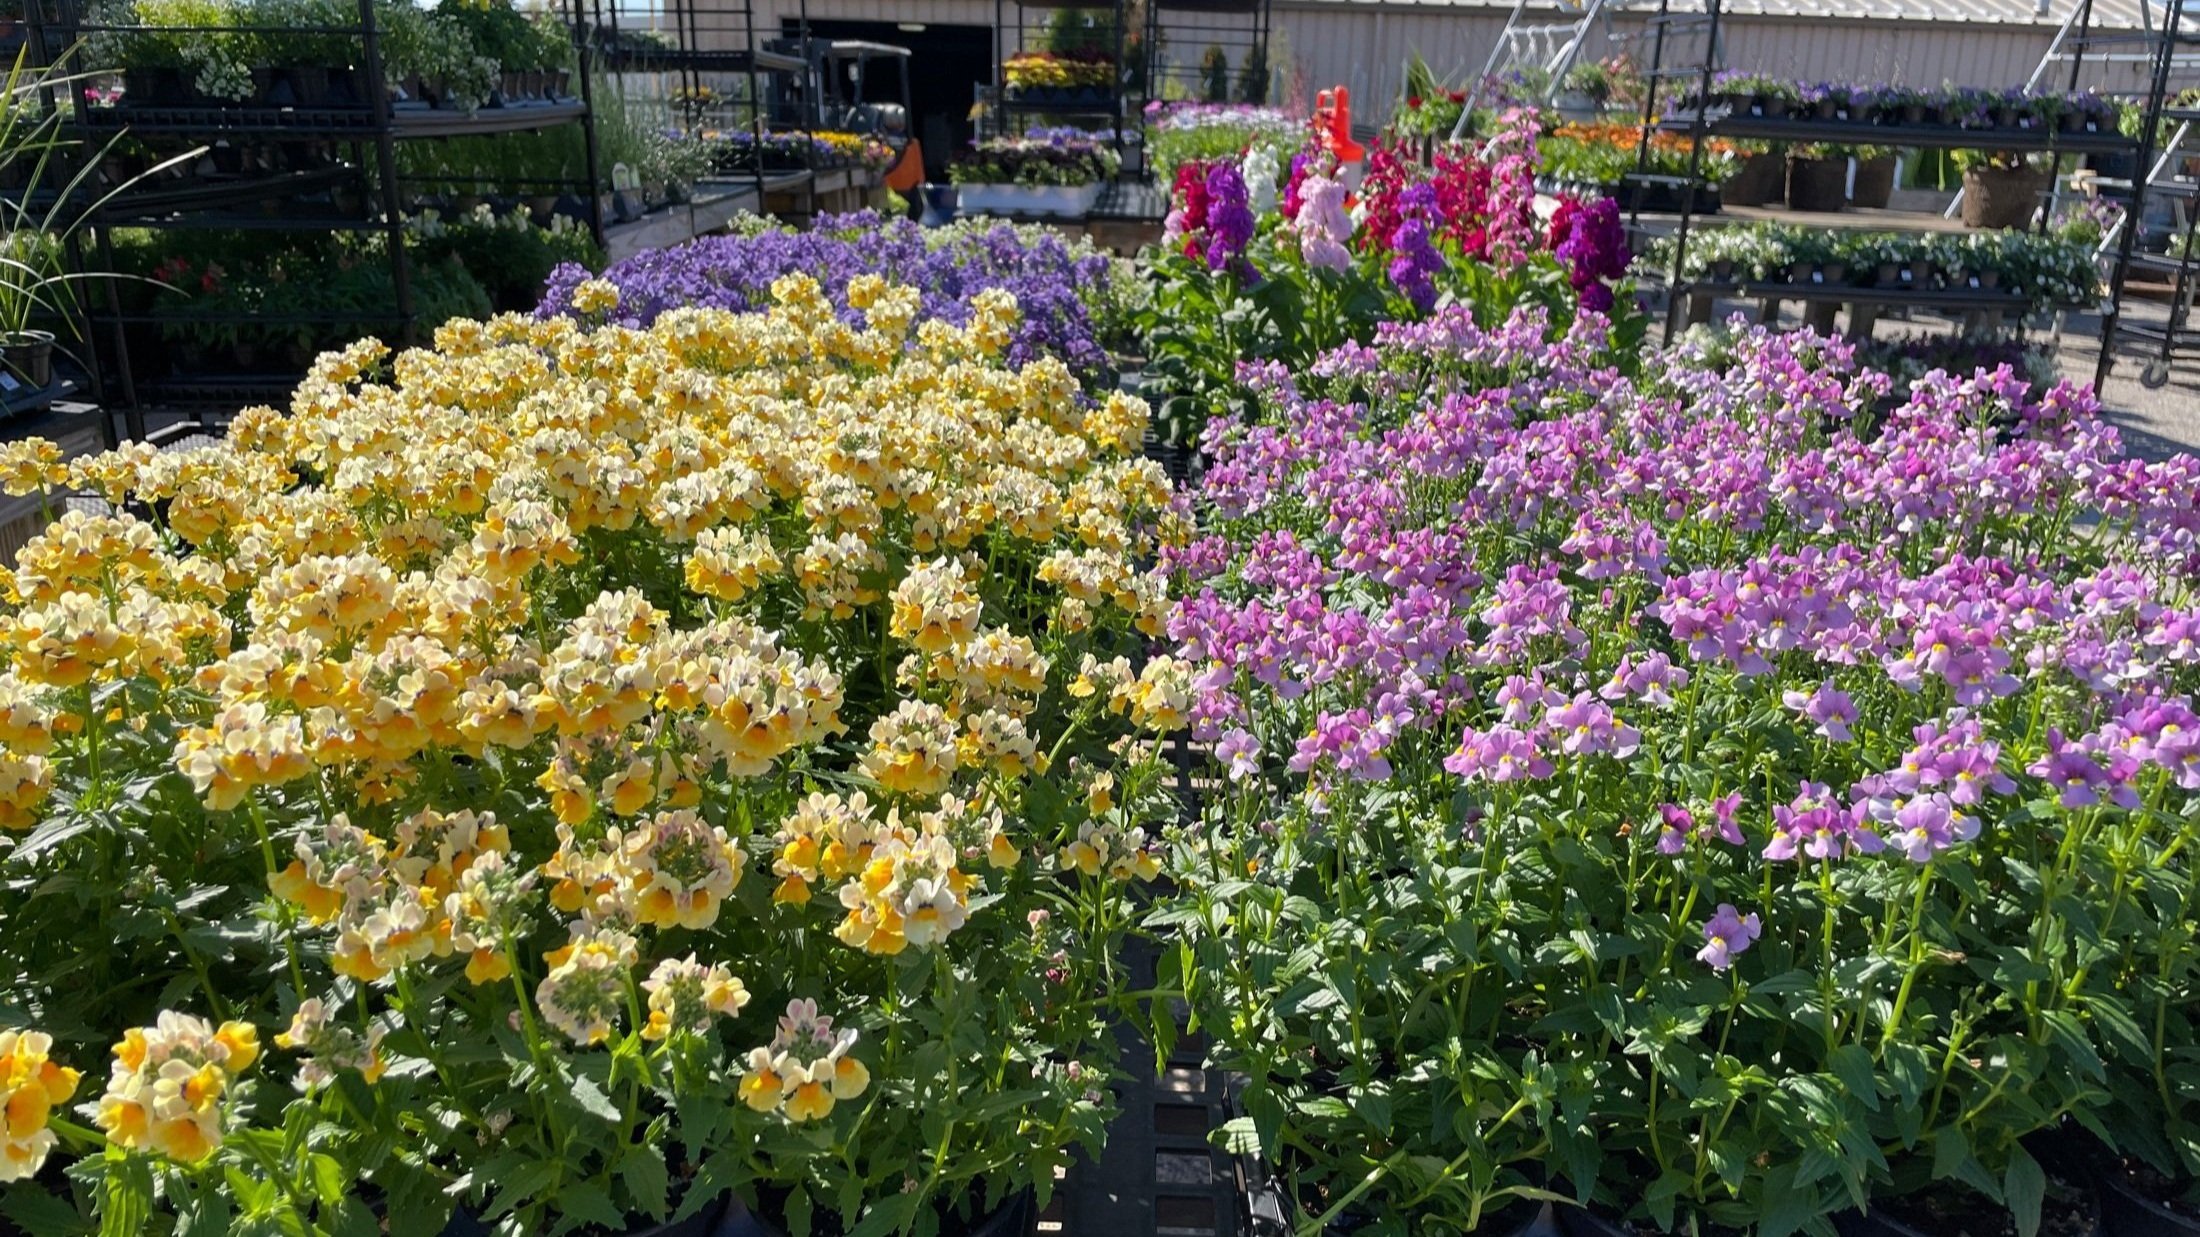  Summer annuals arrive weekly at The Plant Kingdom in Louisville, Kentucky. 